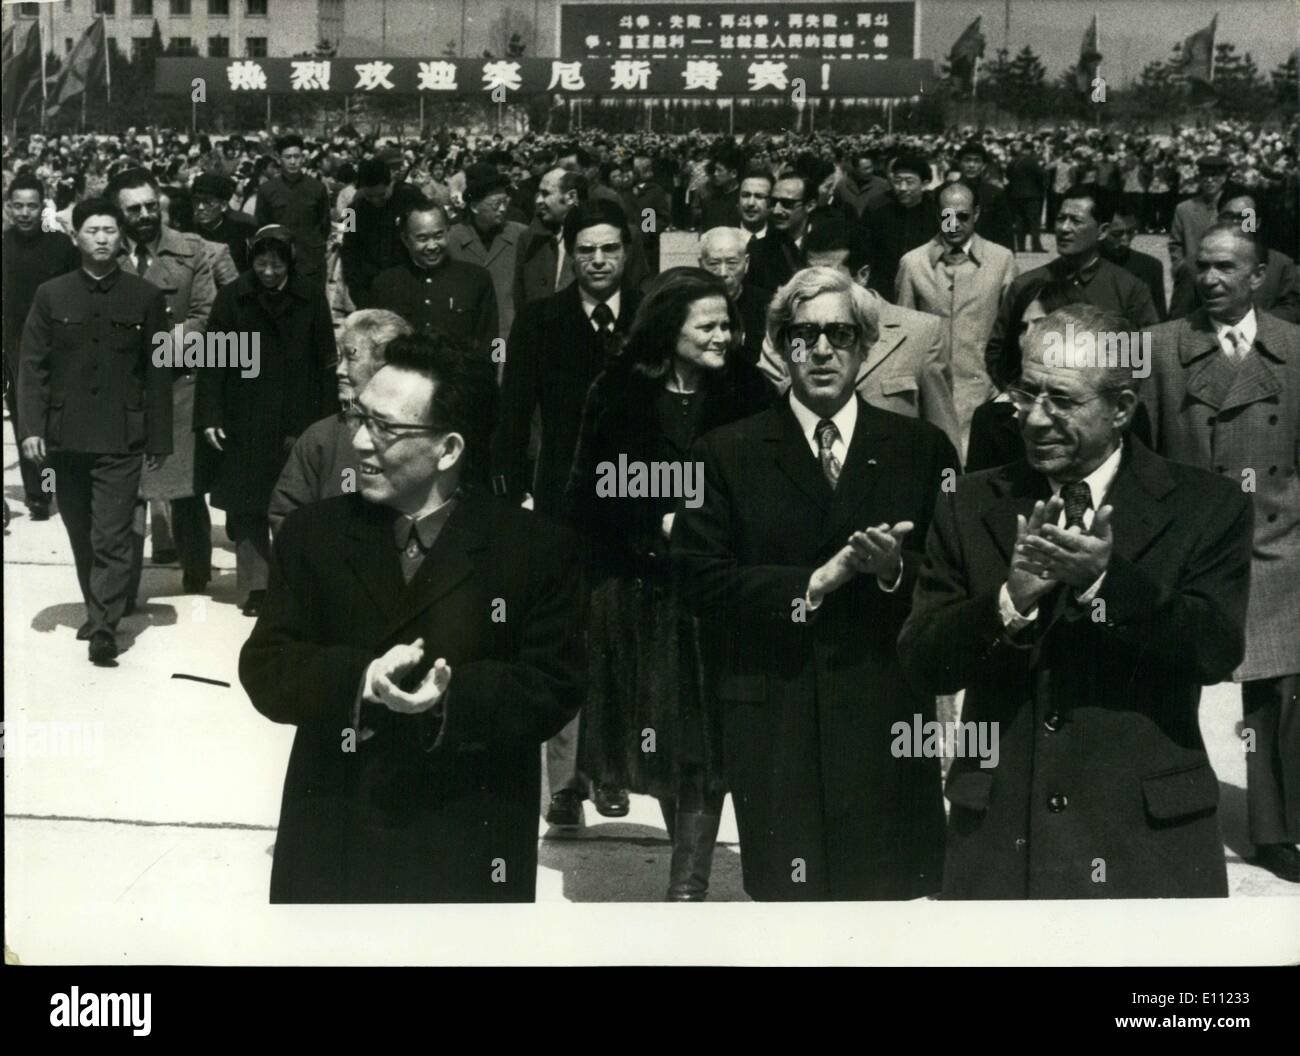 Apr. 10, 1975 - Prime Minister of Tunisia Hedi Nouira is visiting Peking China and was welcomed heartily at the airport. Chang Chun-Chiao is the Vice-Prime Minister of China. Stock Photo